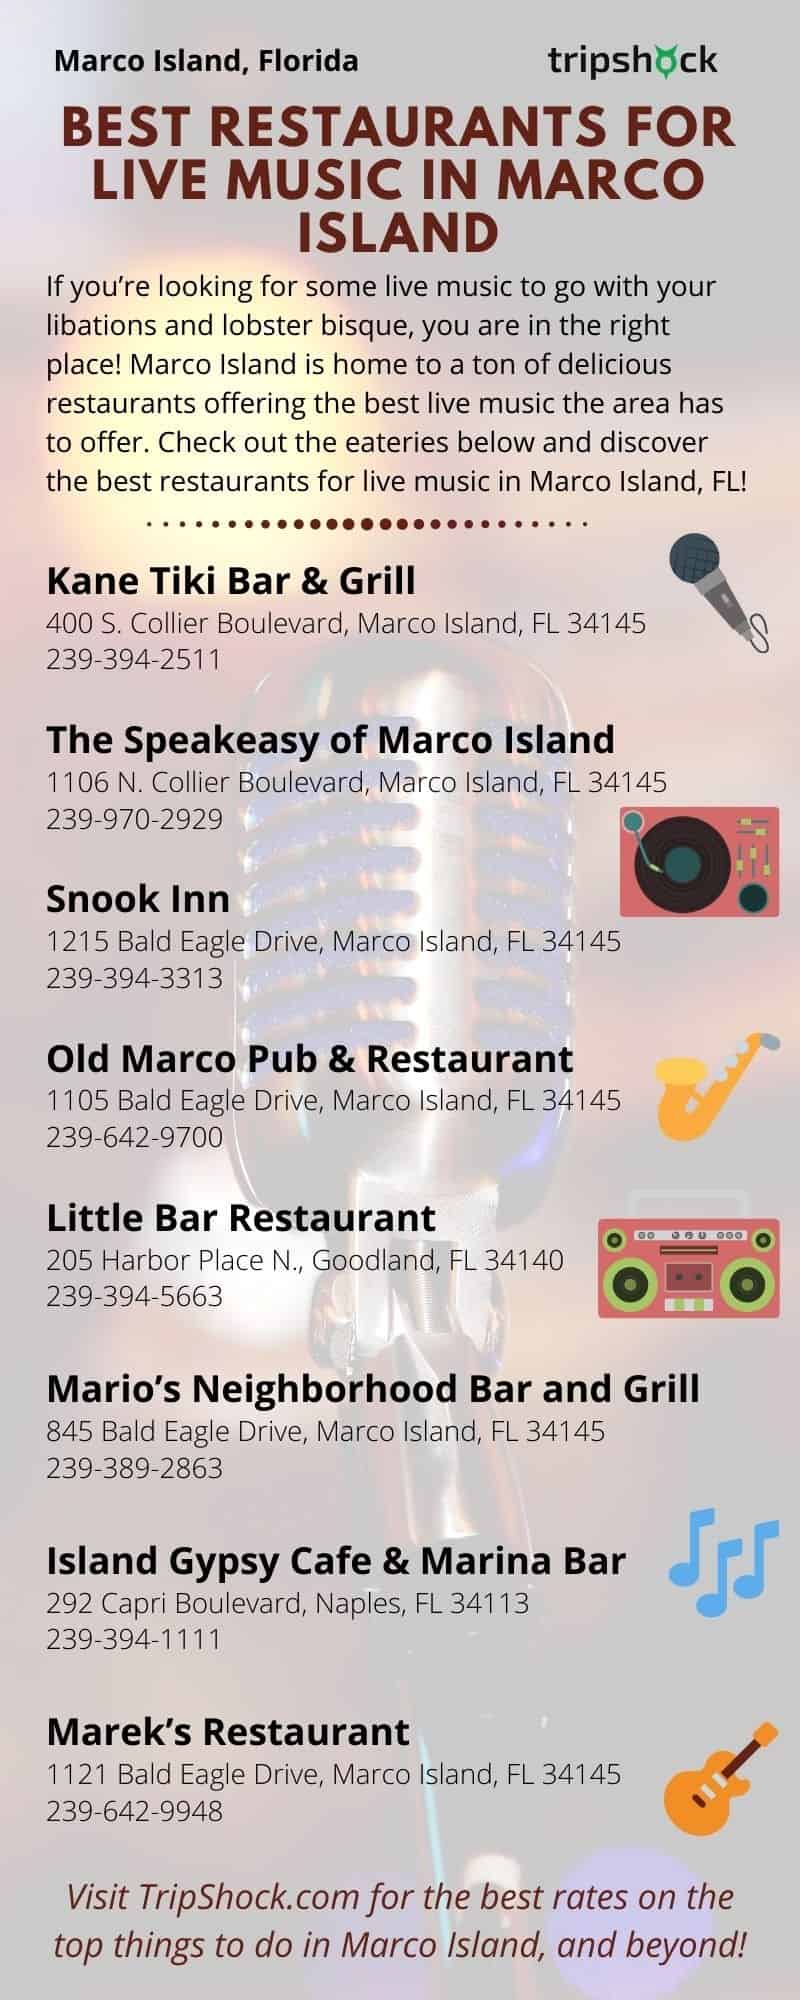 Marco Island Restaurants - Top 10 Places to Eat